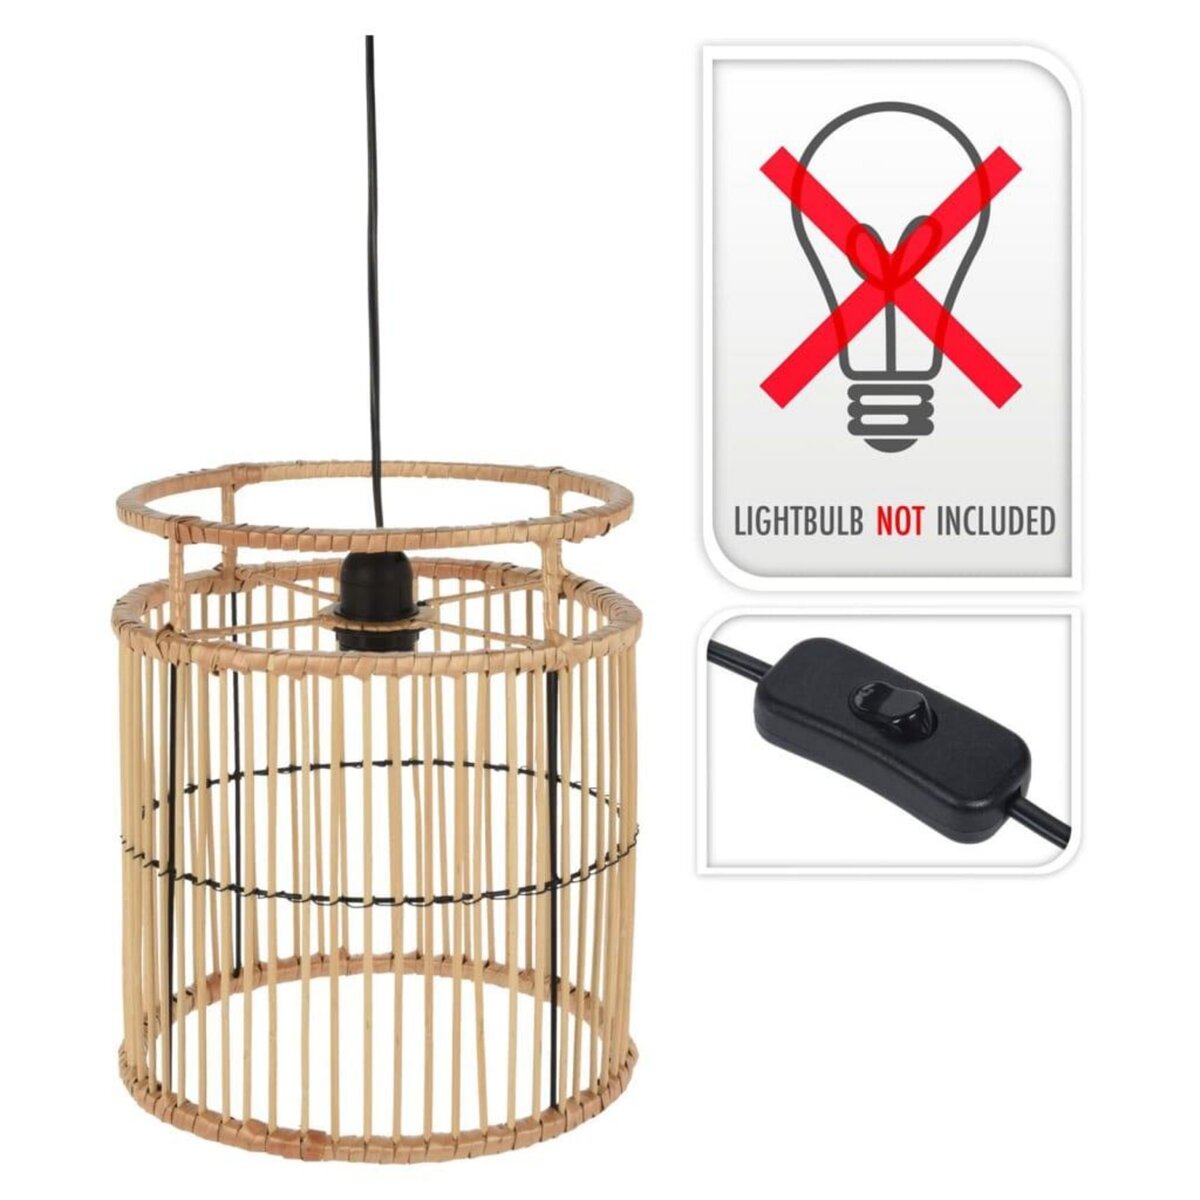 H&S Collection H&S Collection Lampe suspendue Naturel